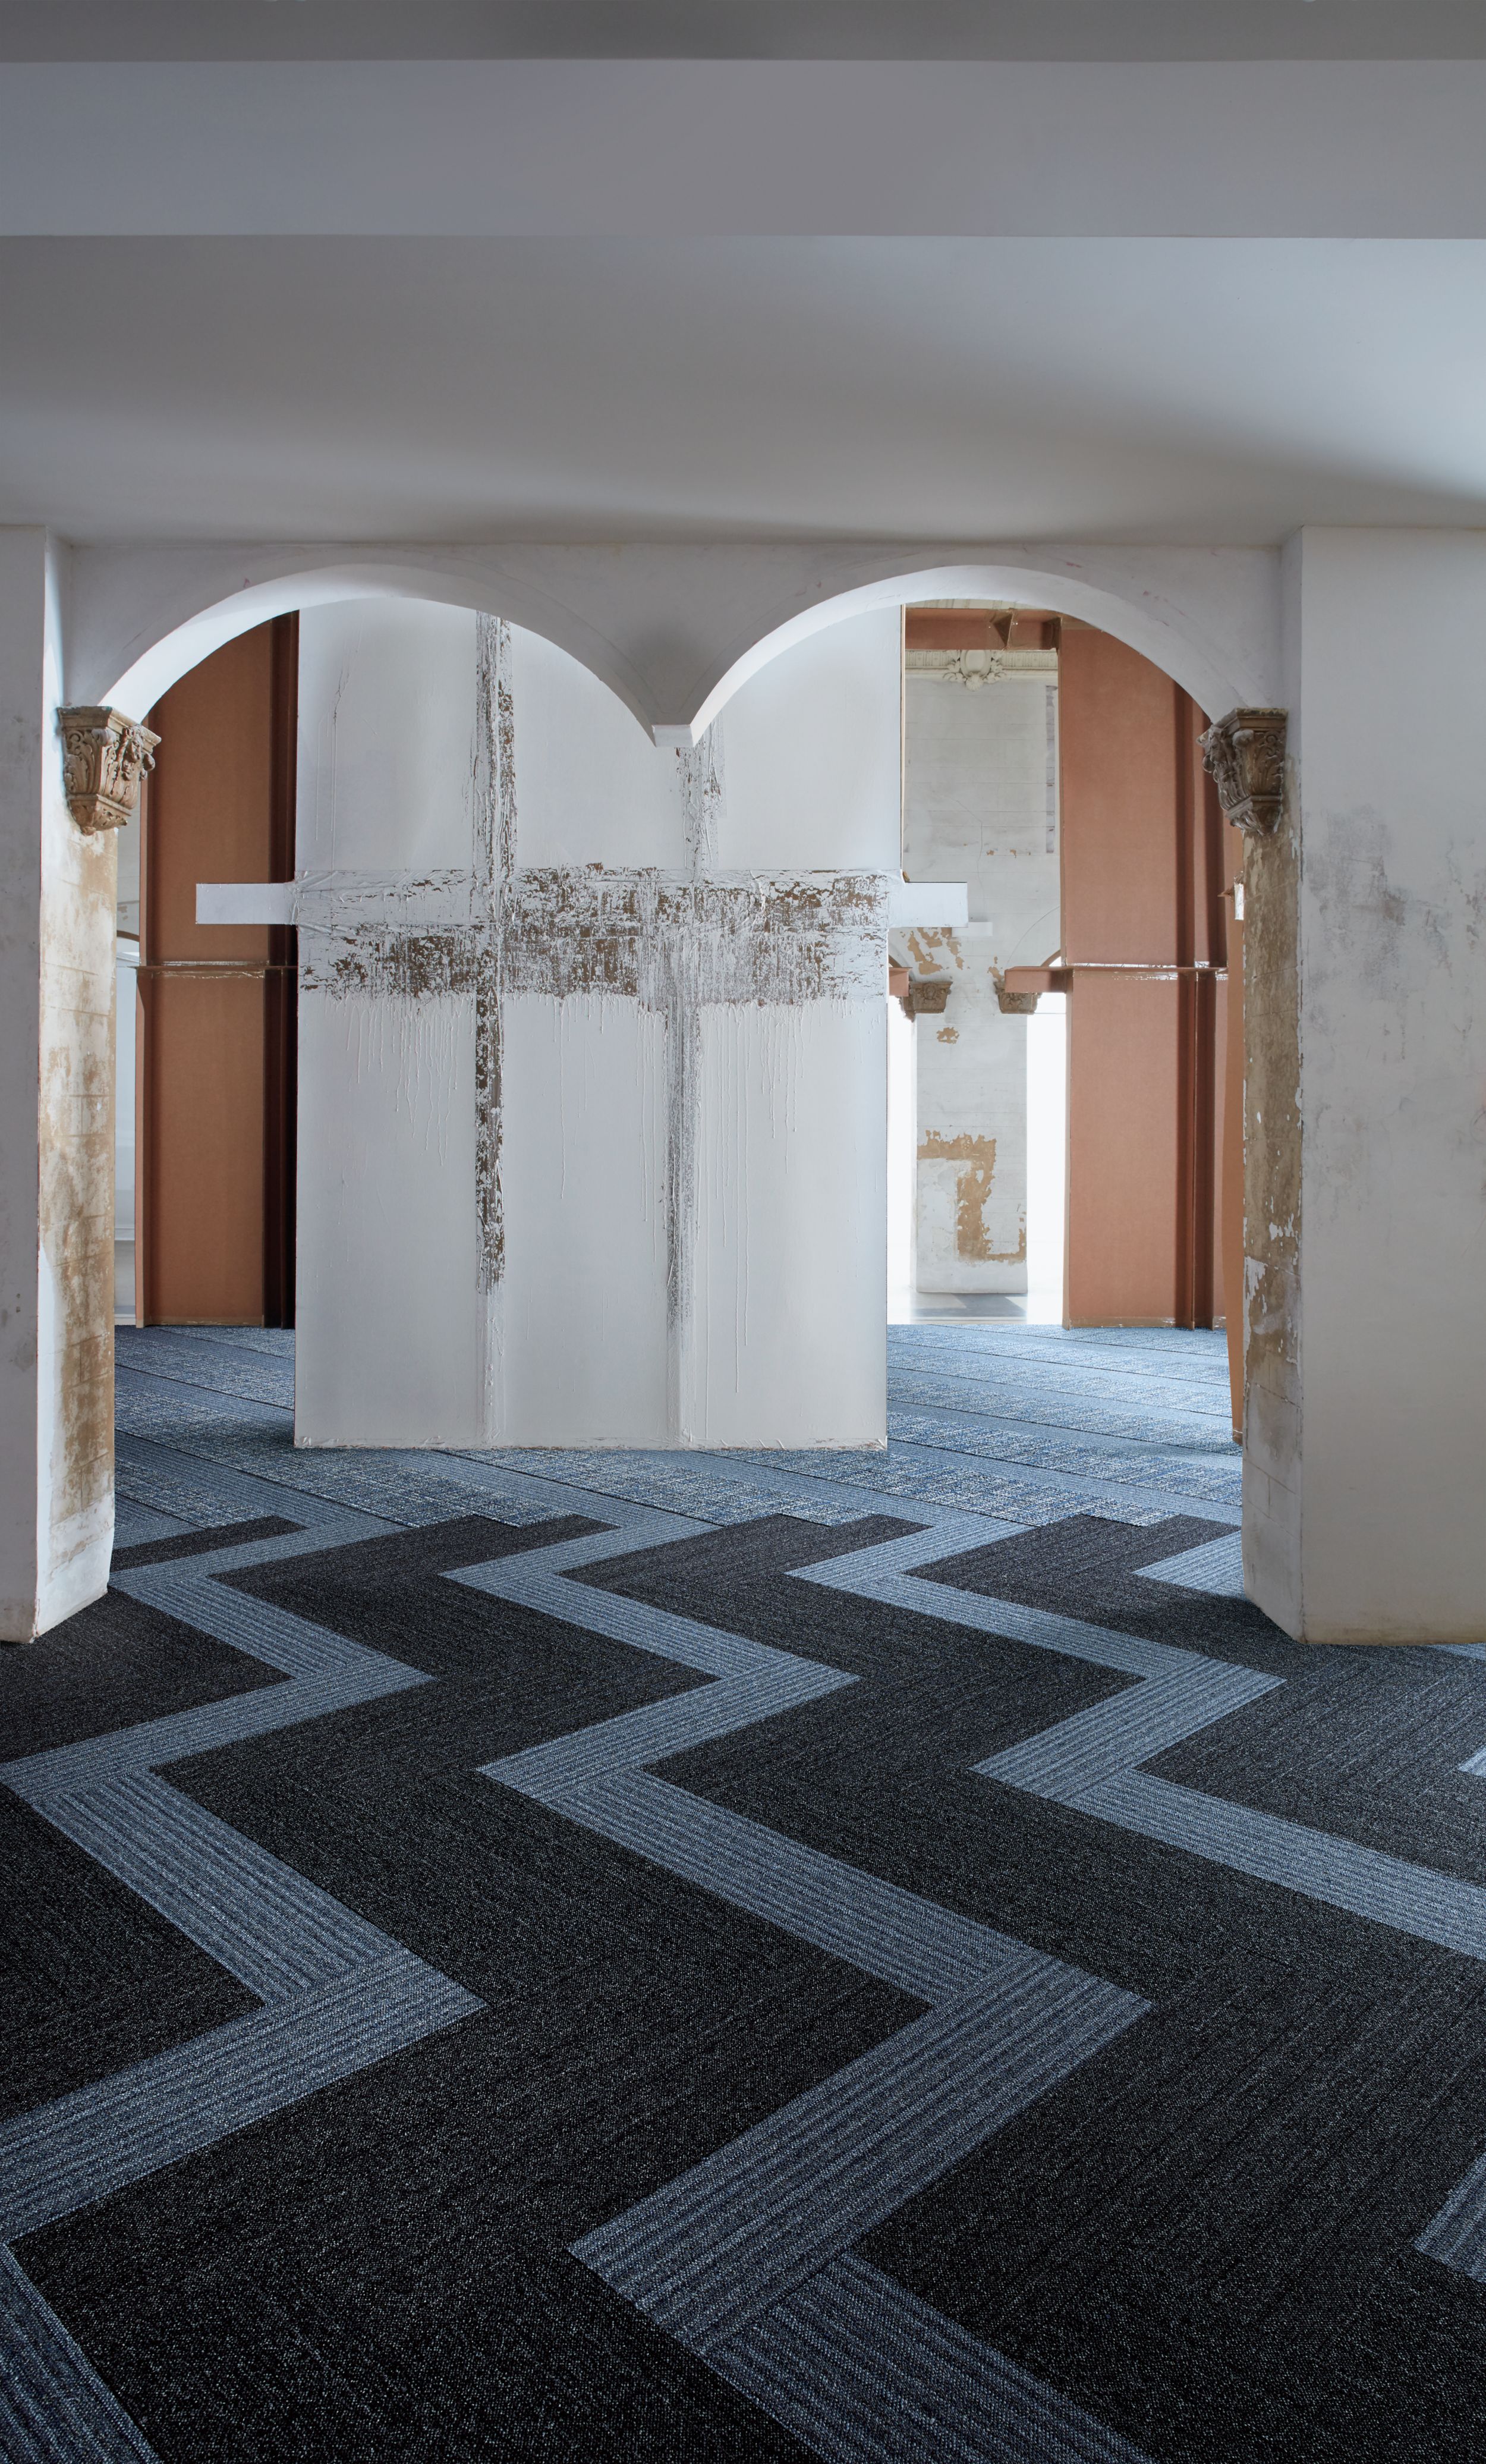 Interface WW865 and WW895 plank carpet tile in lobby setting with archway numéro d’image 6